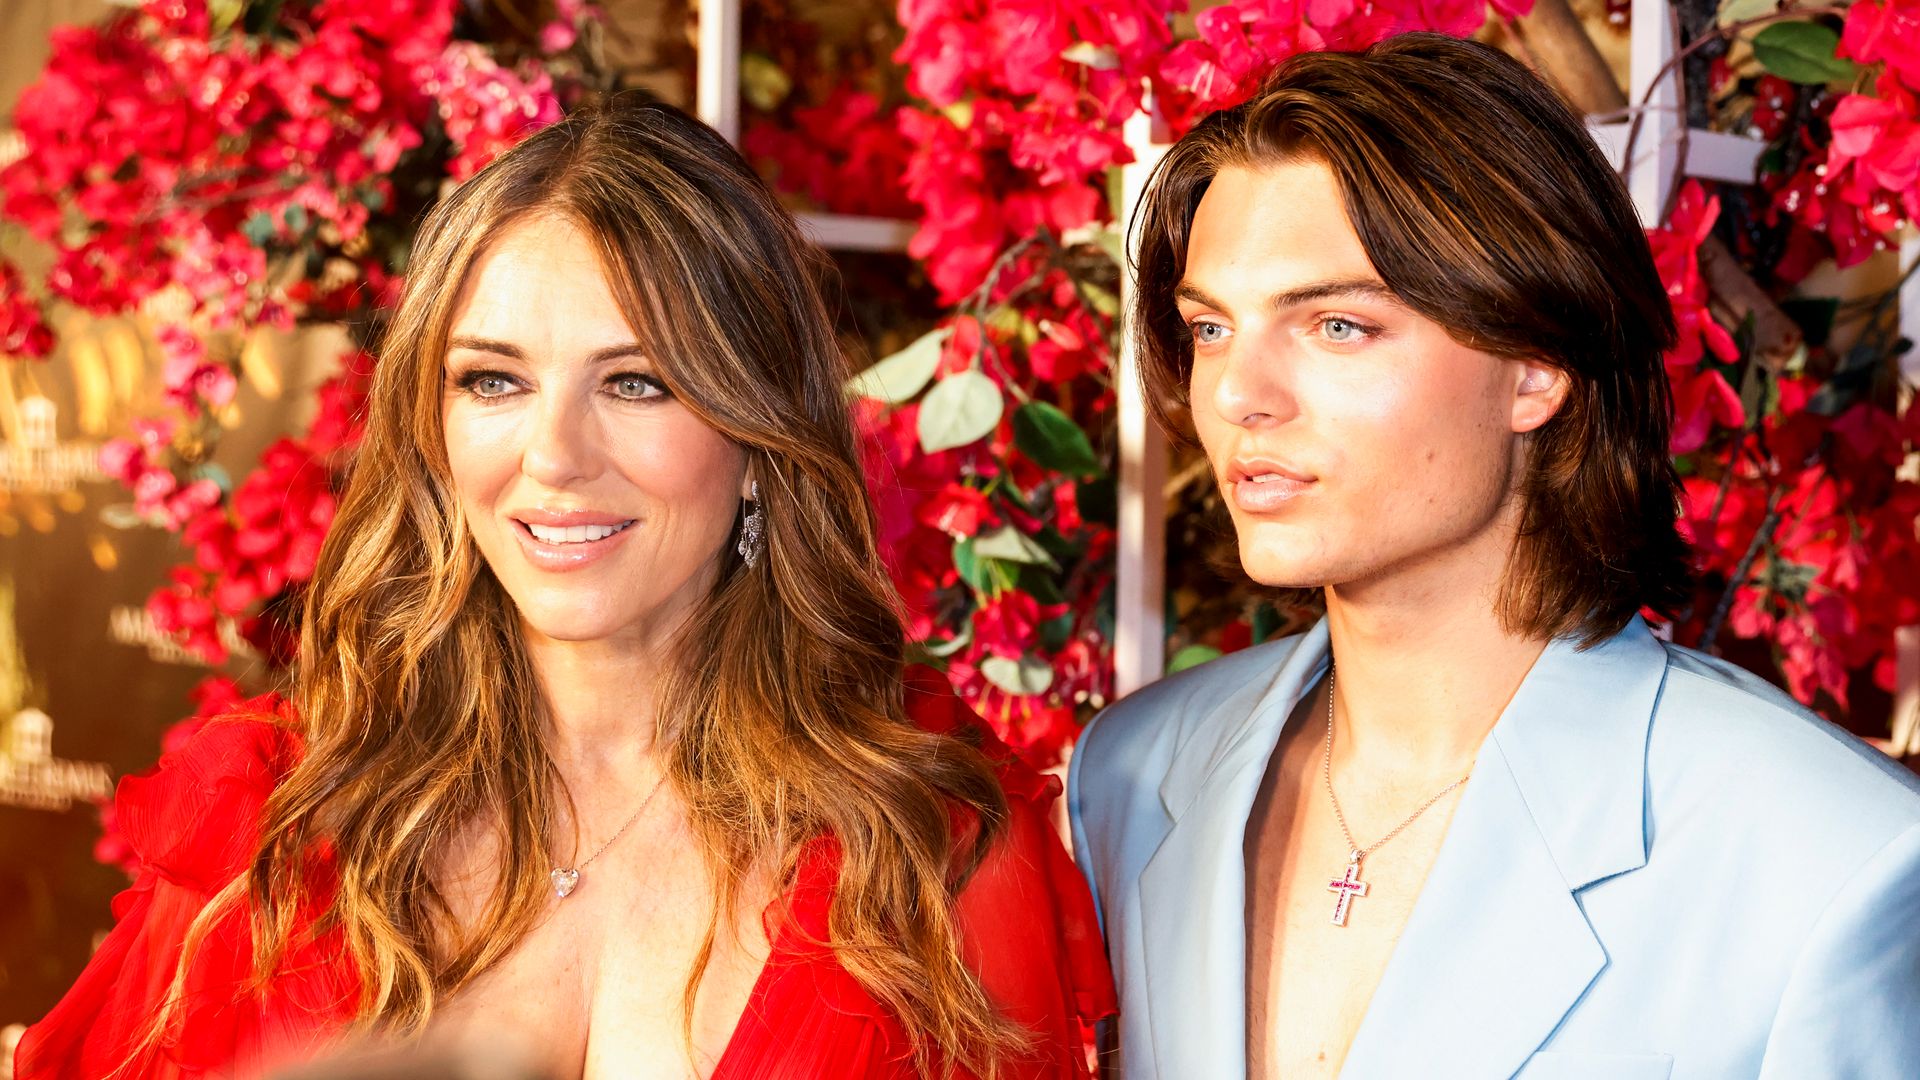 Elizabeth Hurley and Damian Hurley in front of red flowers